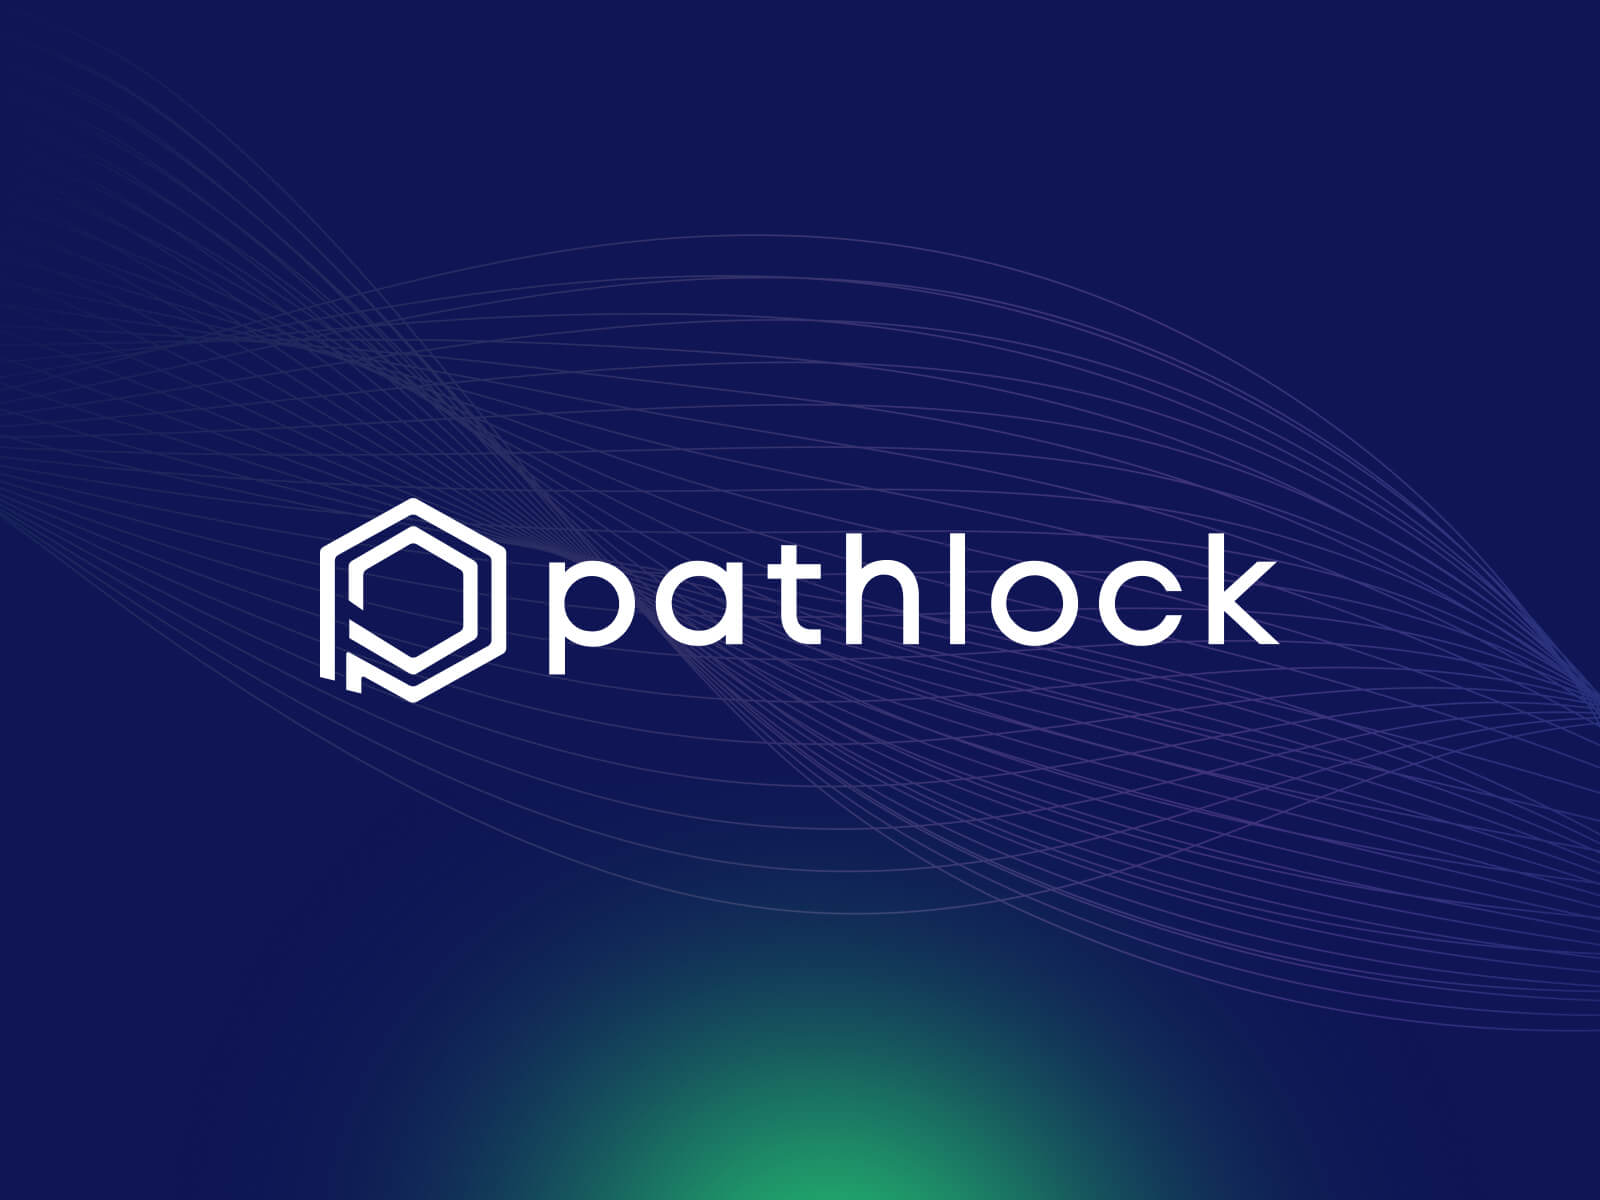 CTB, Inc. Improves Security Audits With Pathlock’s Access Analysis